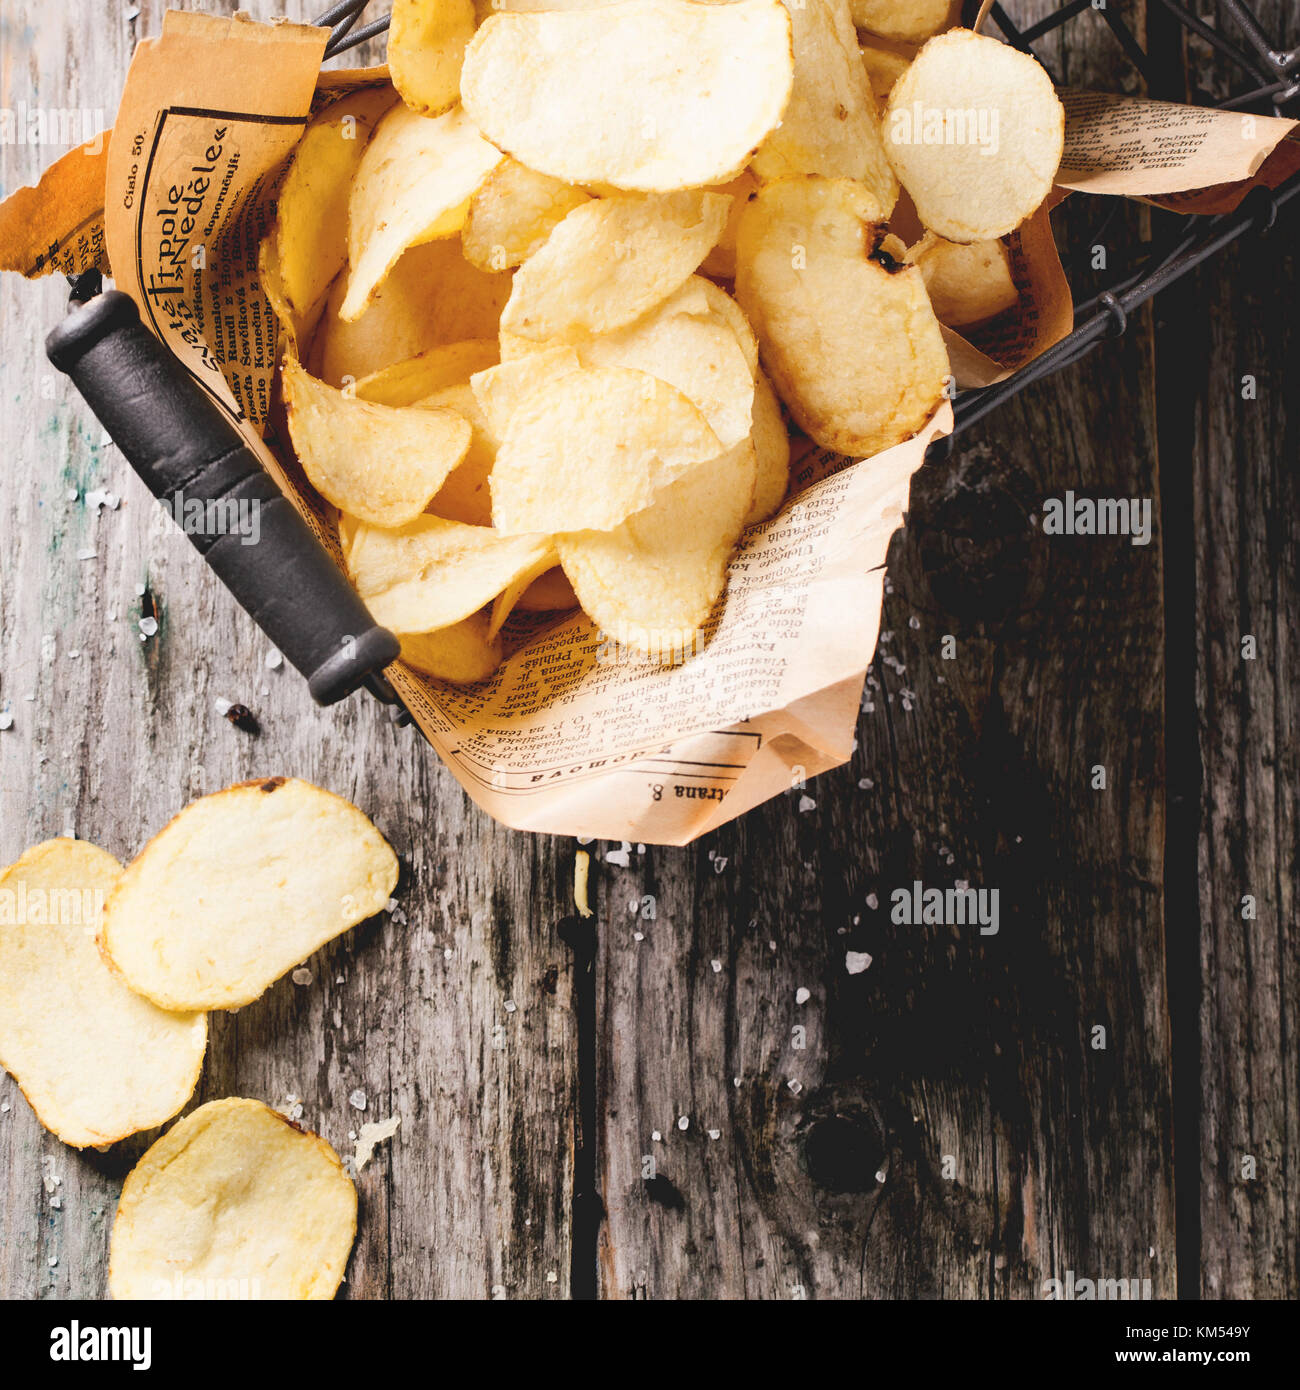 Top view on basket with potato chips with sea salt over old wooden table. Square image Stock Photo